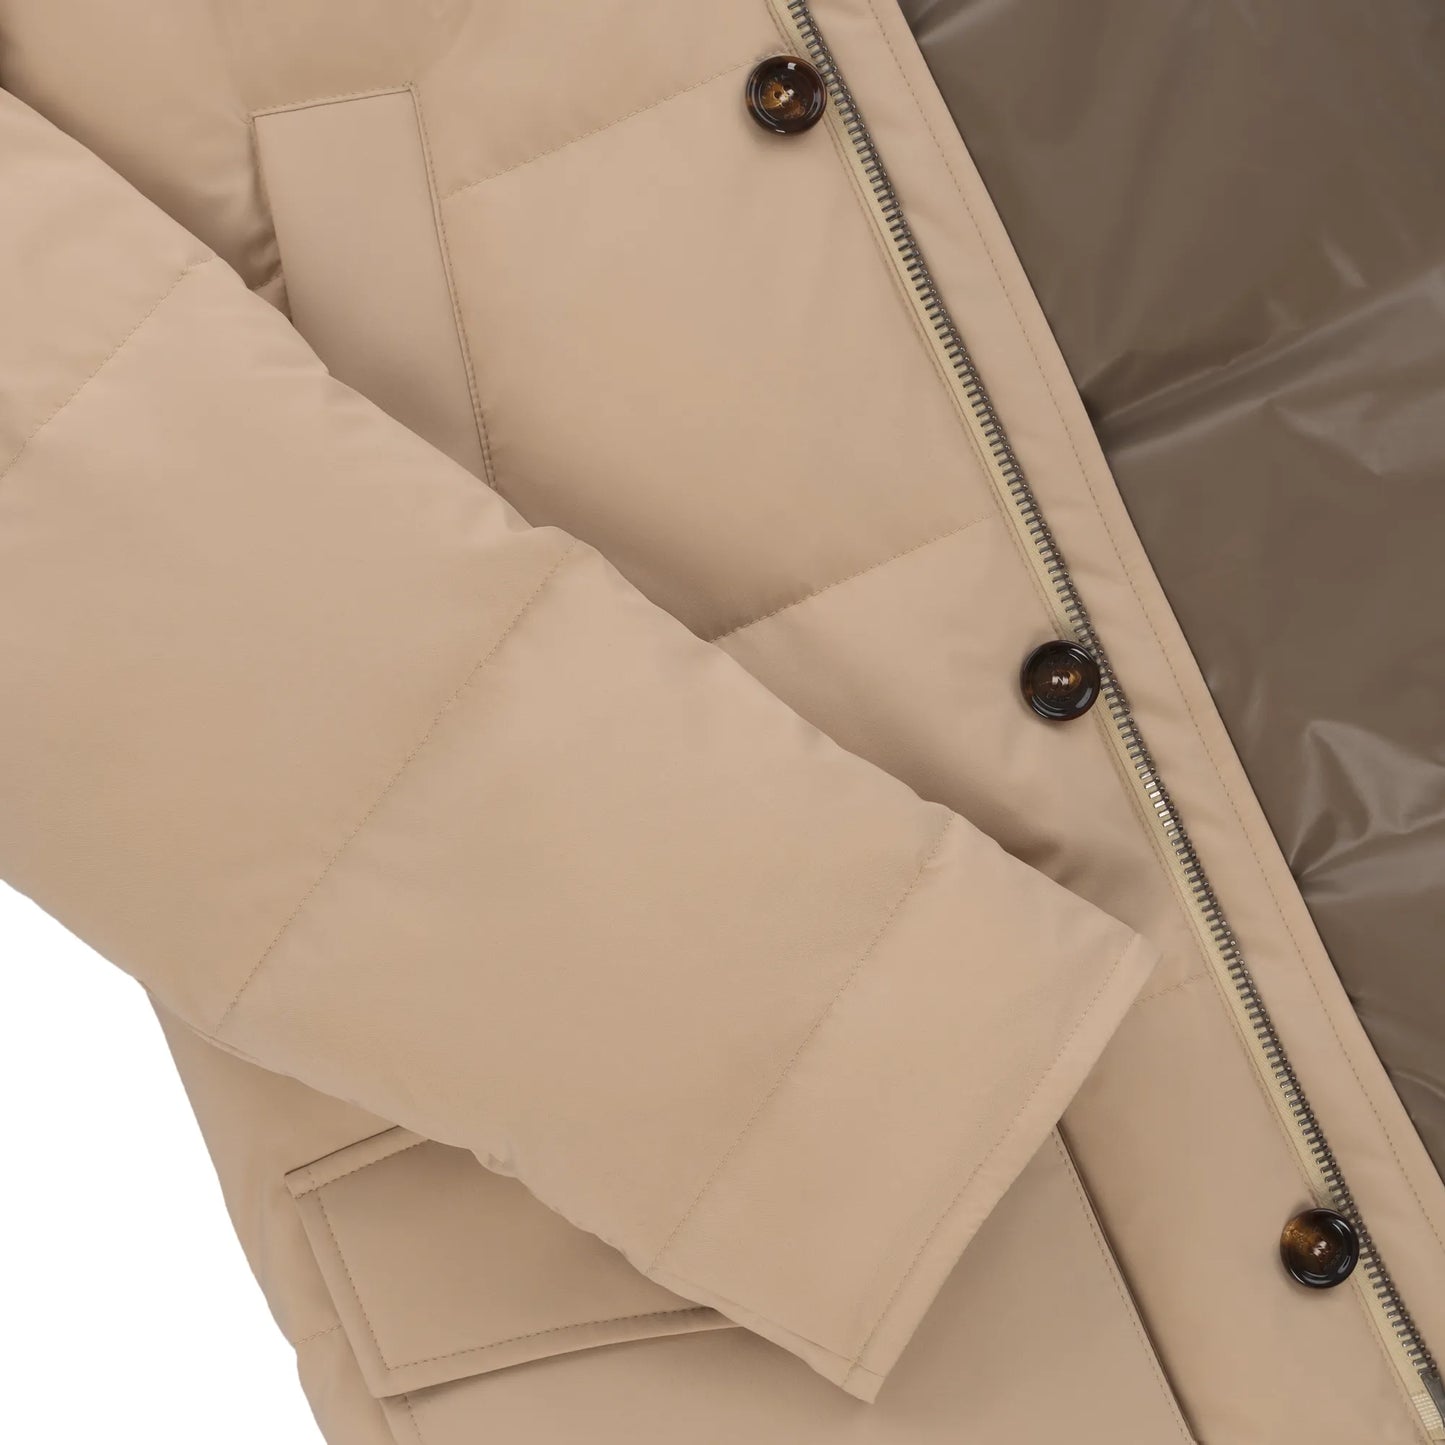 Raccoon Parka Jacket in Champagne